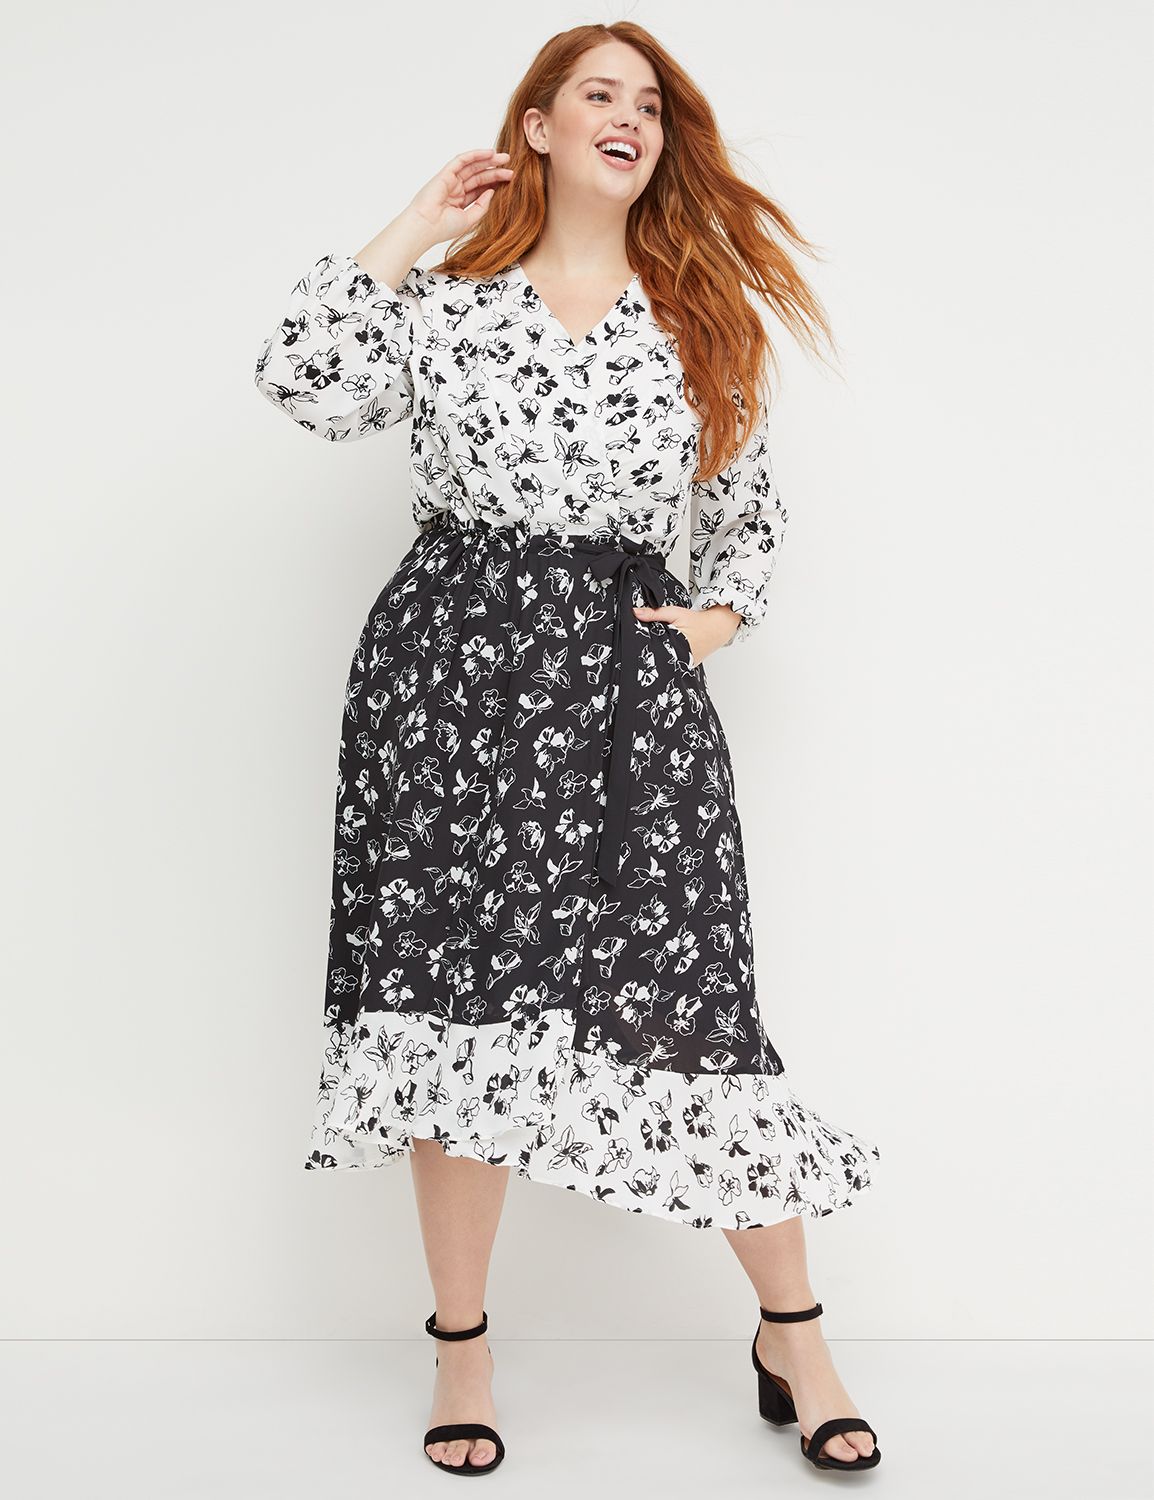 ADD TO FAVORITES Beauticurve Mixed Floral Wrap Dress